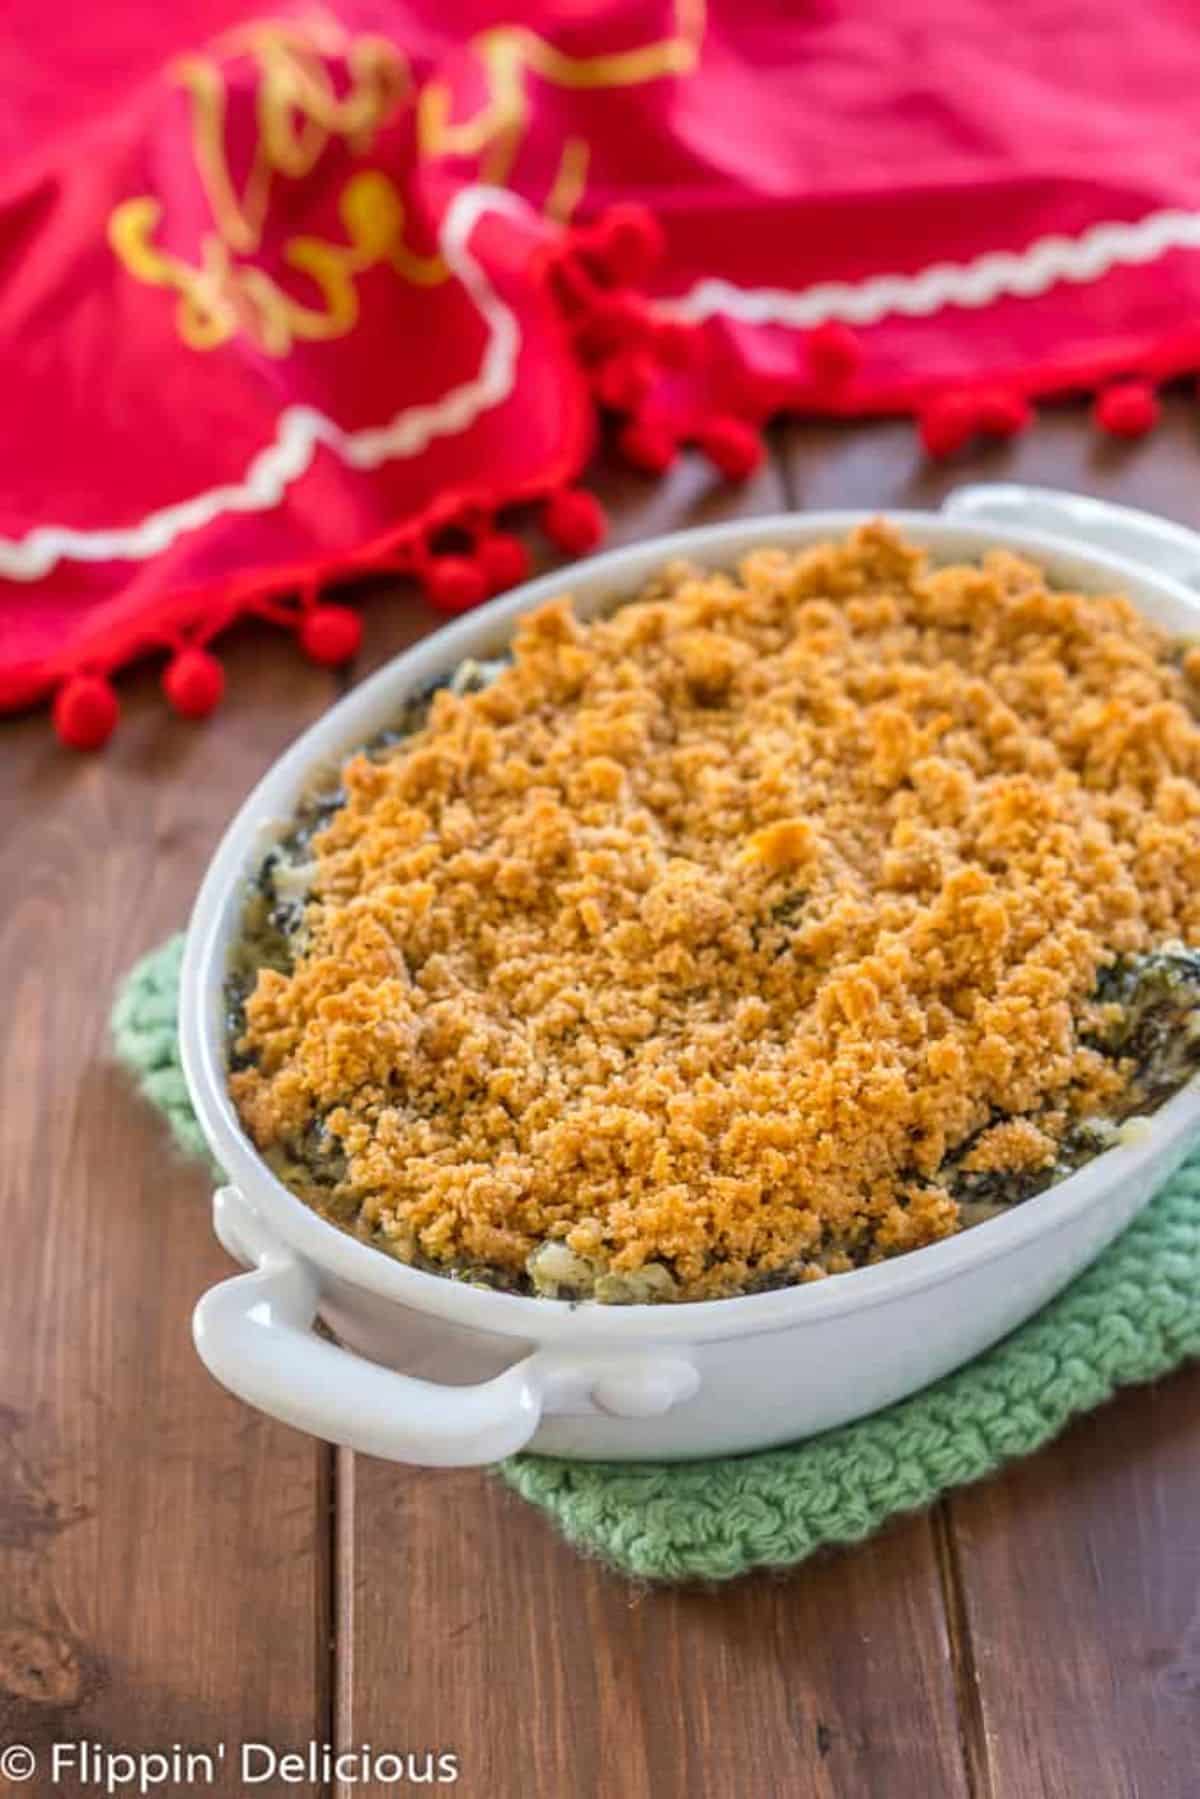 Gluten-Free Spinach Artichoke Dip with Breadcrumbs in a tray.